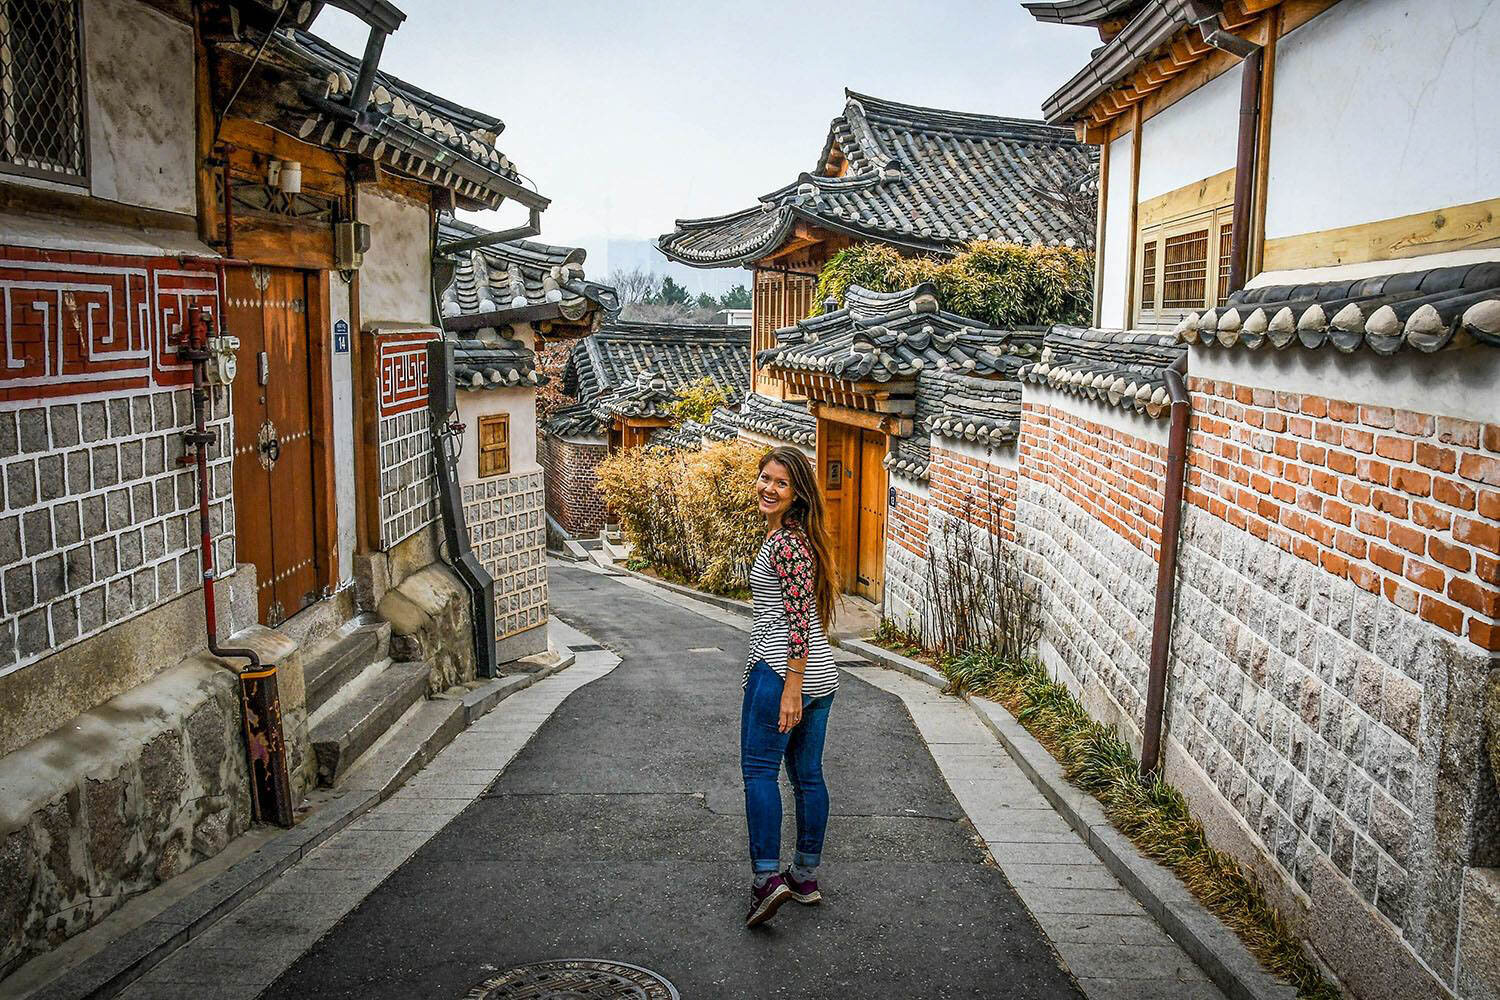 Things to Do in Seoul | Bukcheon Village